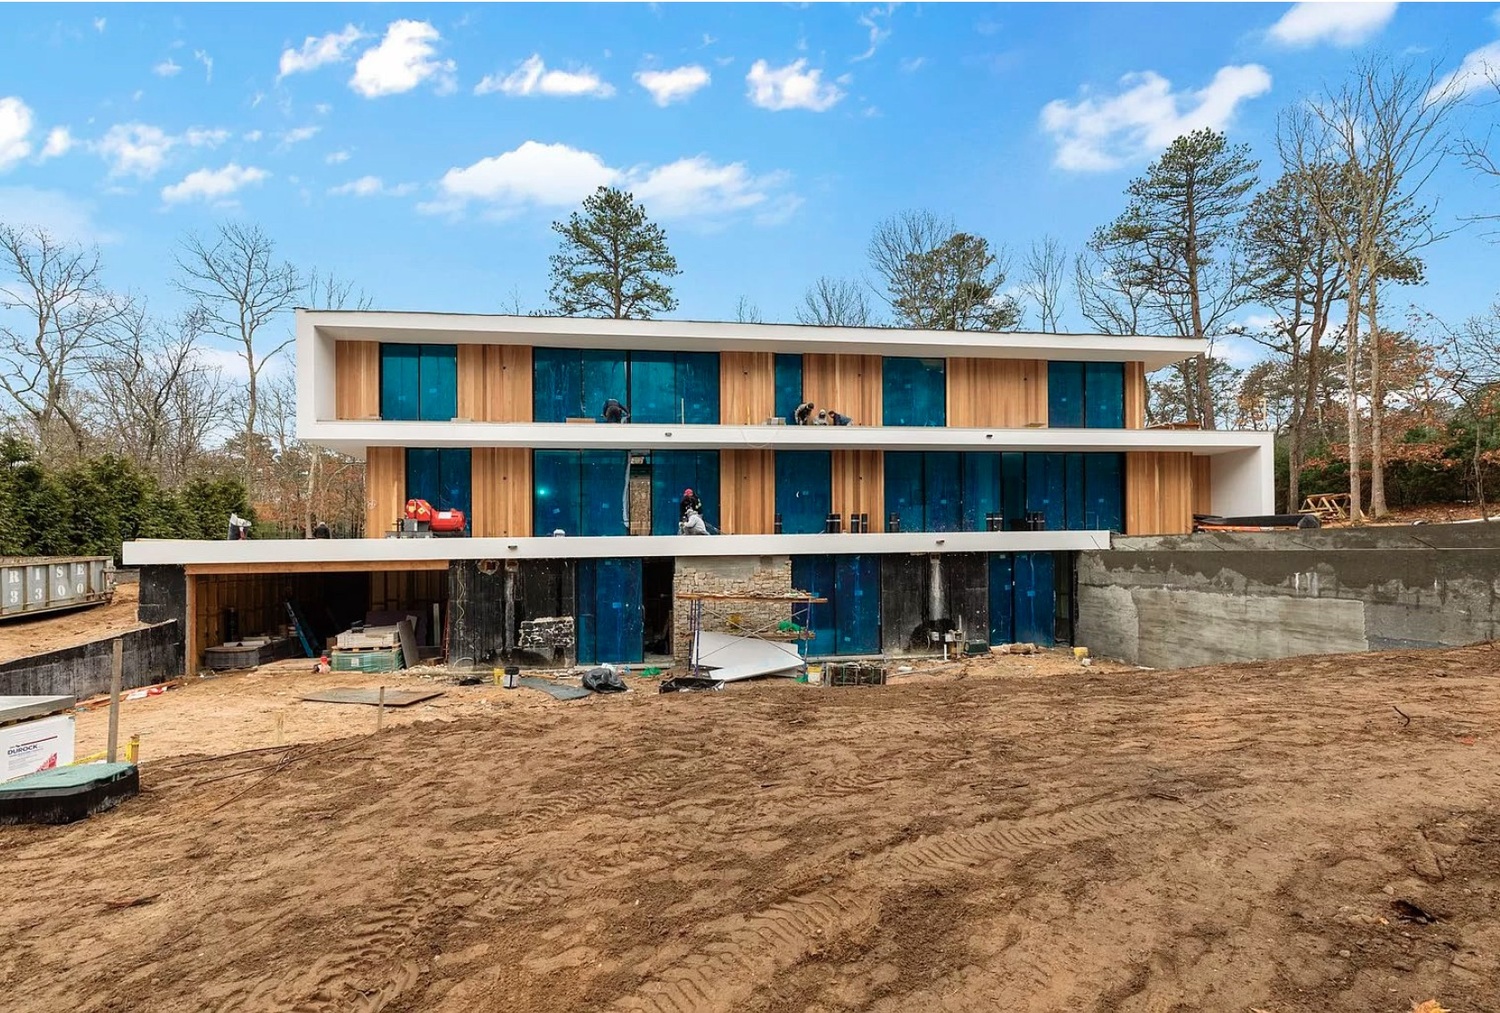 In one example the committee pointed to, an excavated rear yard and retaining walls had allowed a developer to create a lower level that was not counted as part of the house's official size but was essentially a third story. EAST HAMPTON TOWN